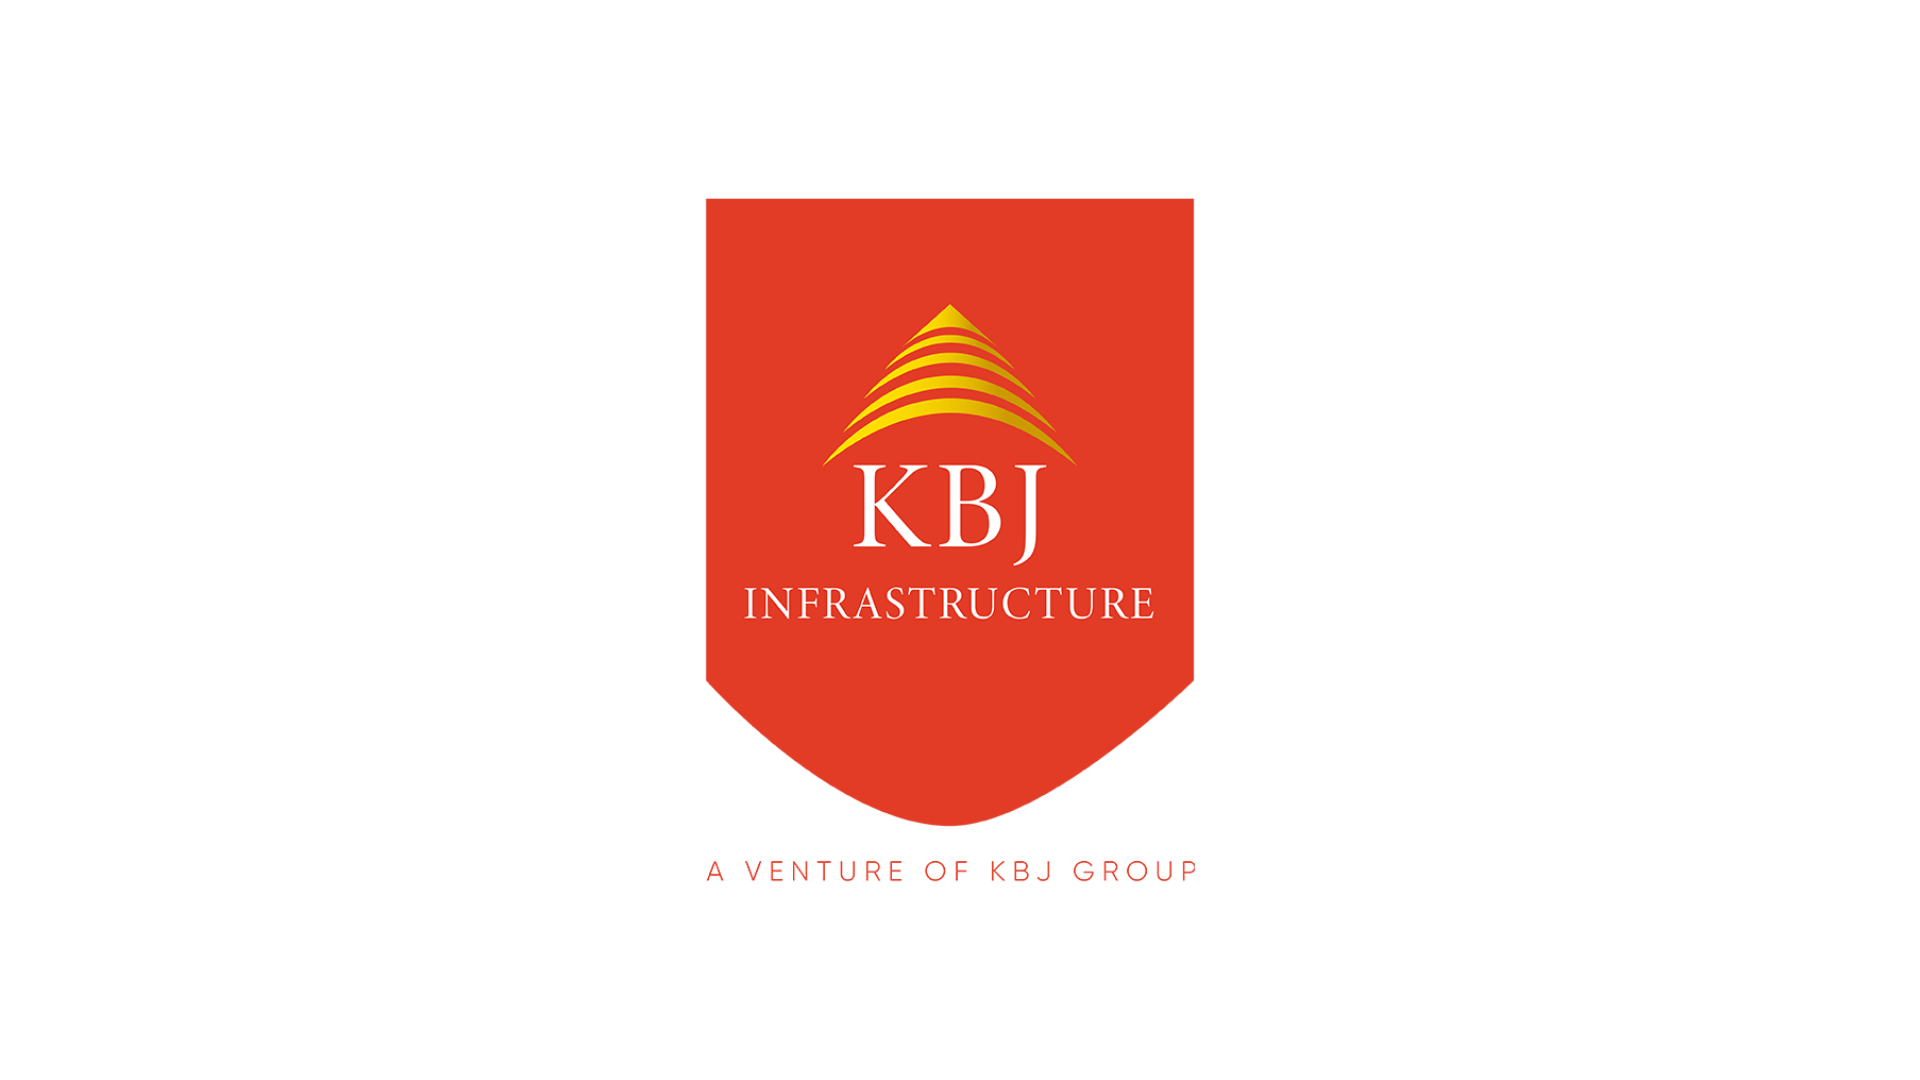 KBJ Infrastructure, a venture of the conglomerate KBJ Group, talks about the industry and its own journey